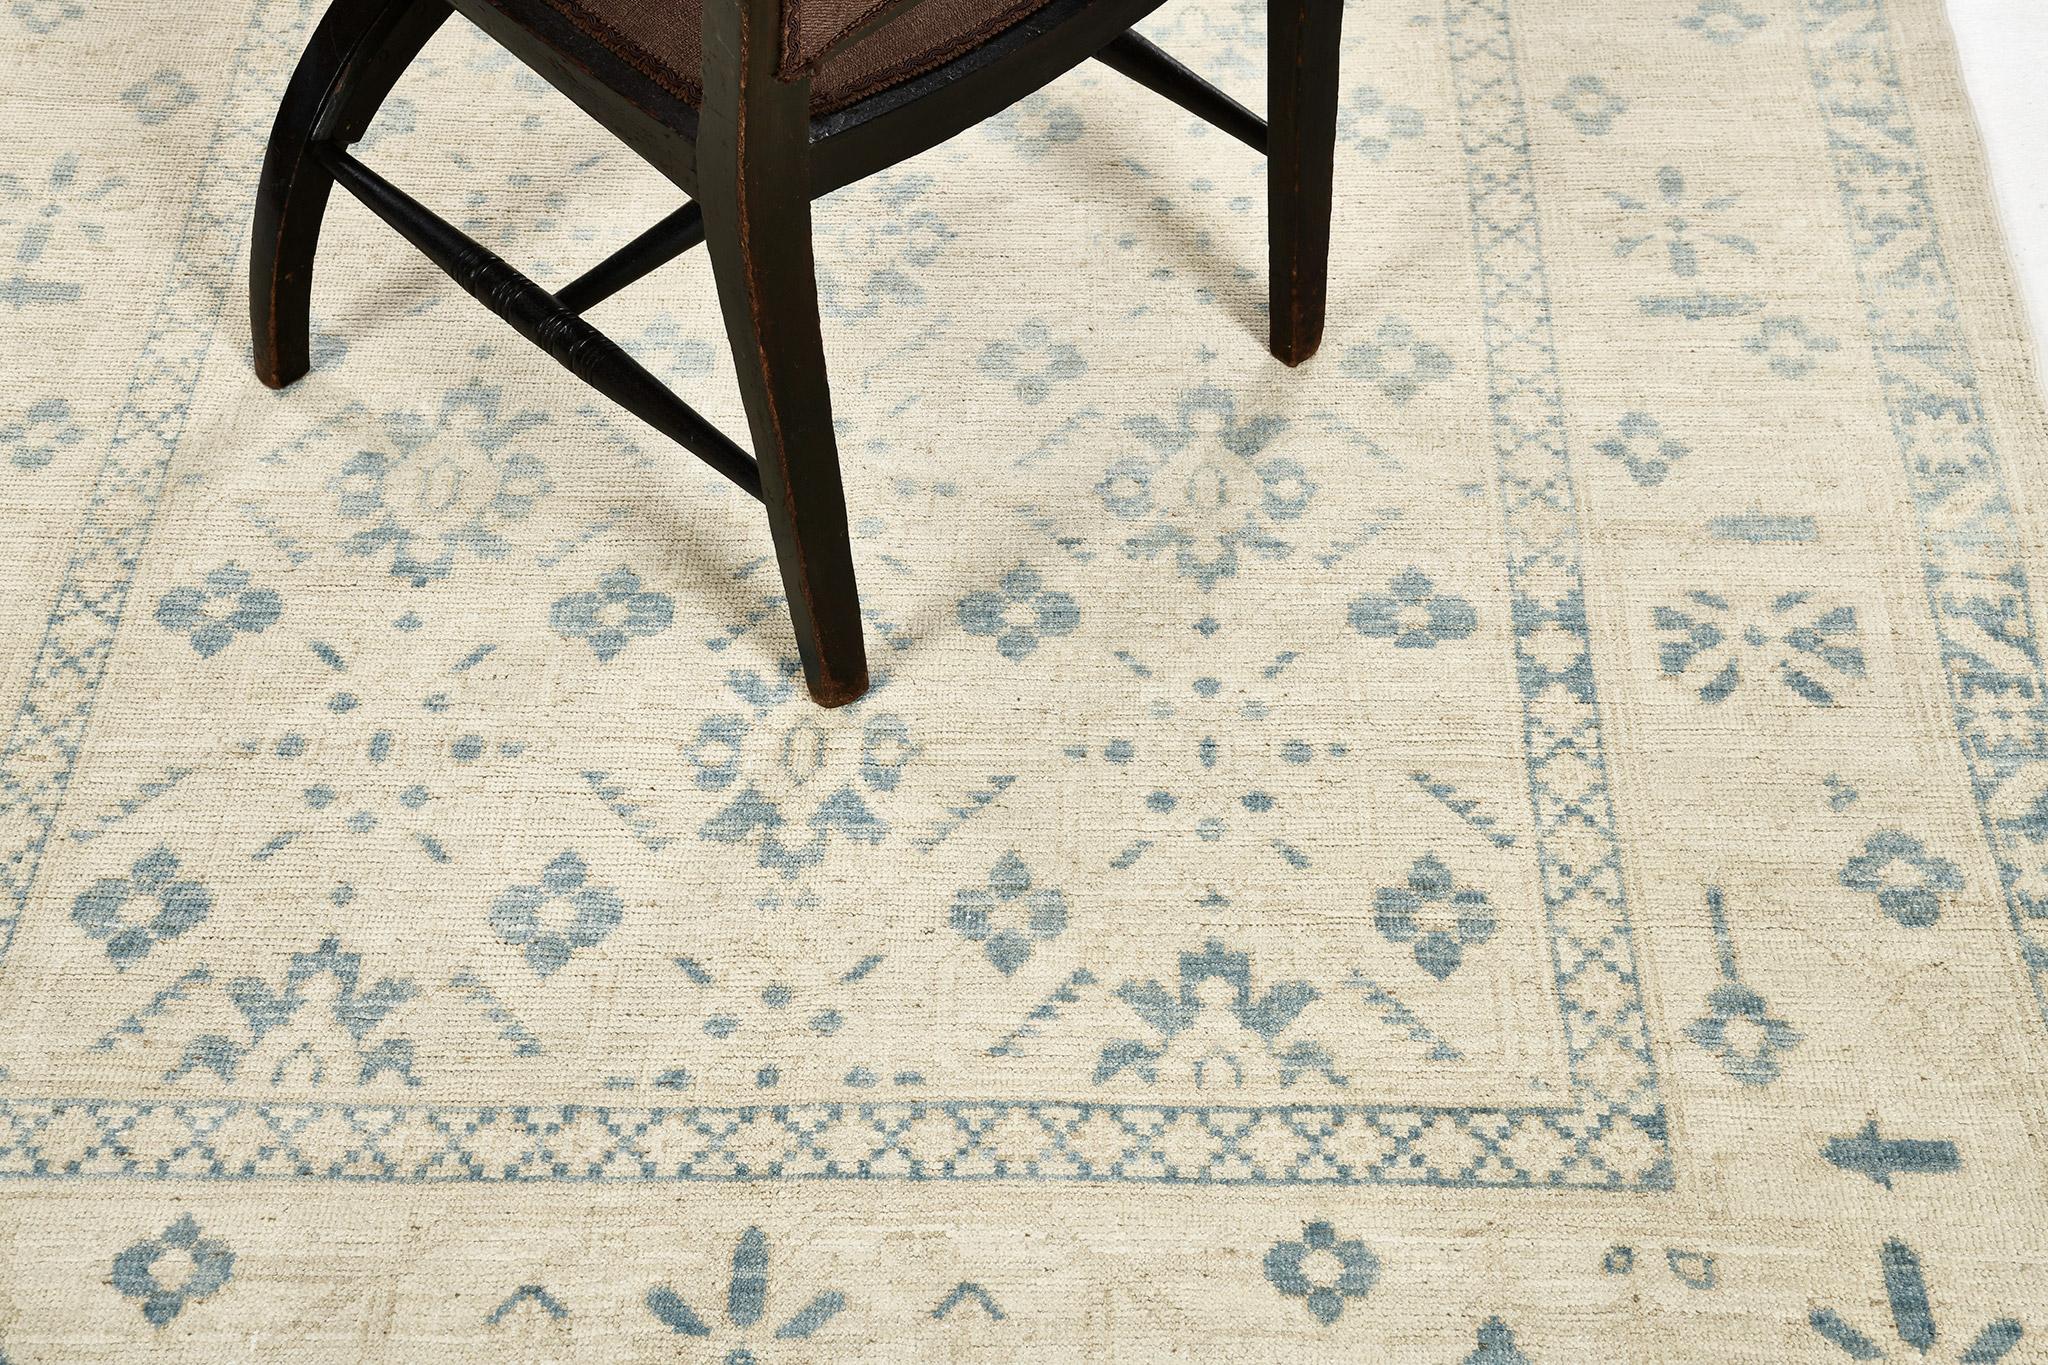 A vintage style revival rug in Safira Collection featuring the muted tones of sand and aegean blue. All-over pattern of blossoming palmettes and botanical patterns are enclosed by borders of various ornate elements that blend together in harmony. A